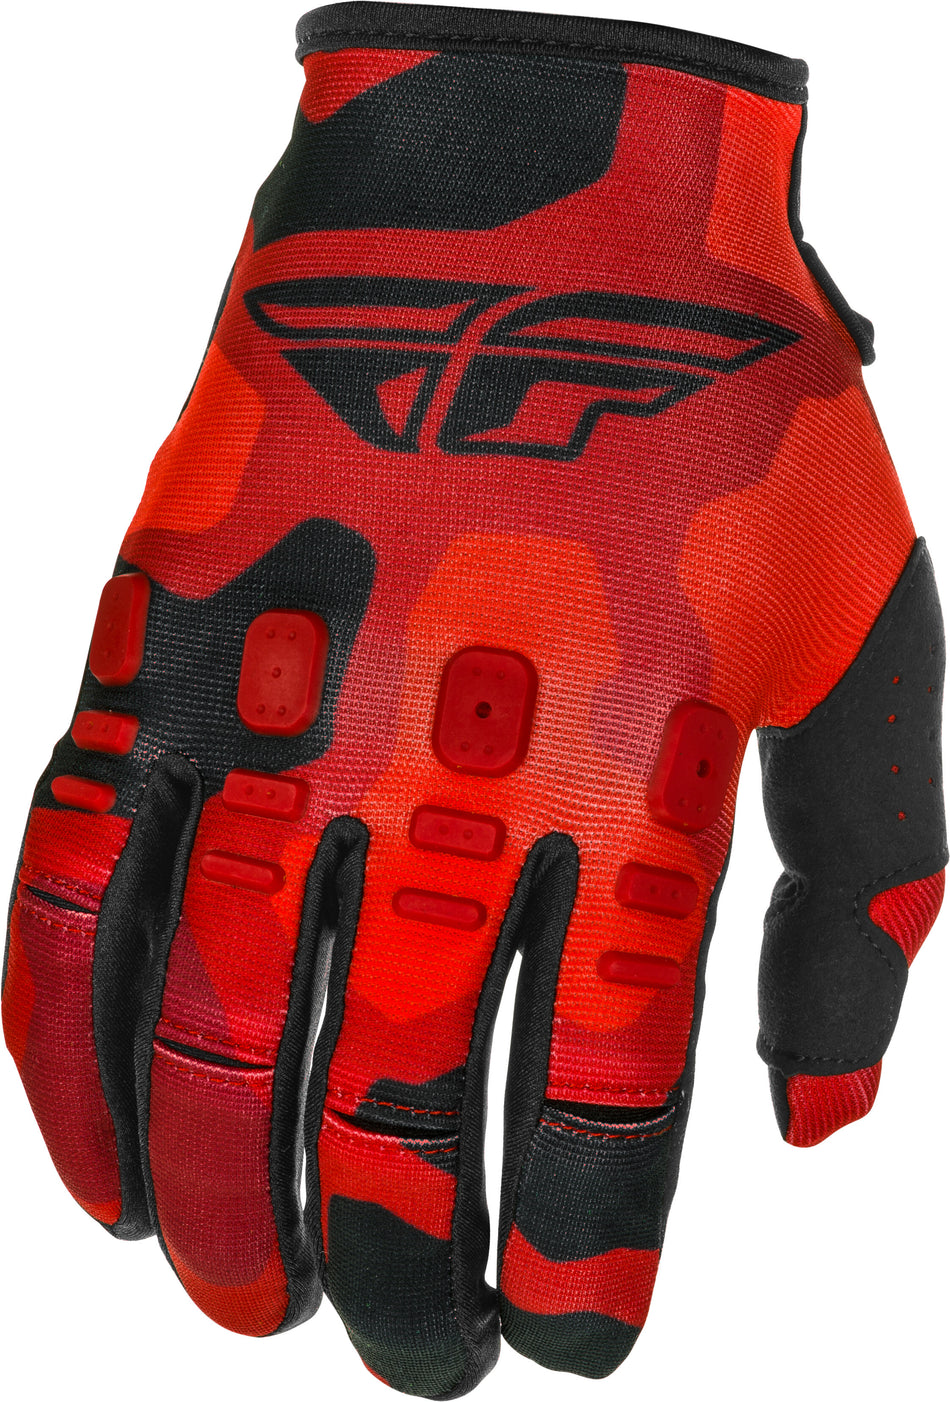 FLY RACING Youth Kinetic K221 Gloves Red/Black Sz 05 374-51205